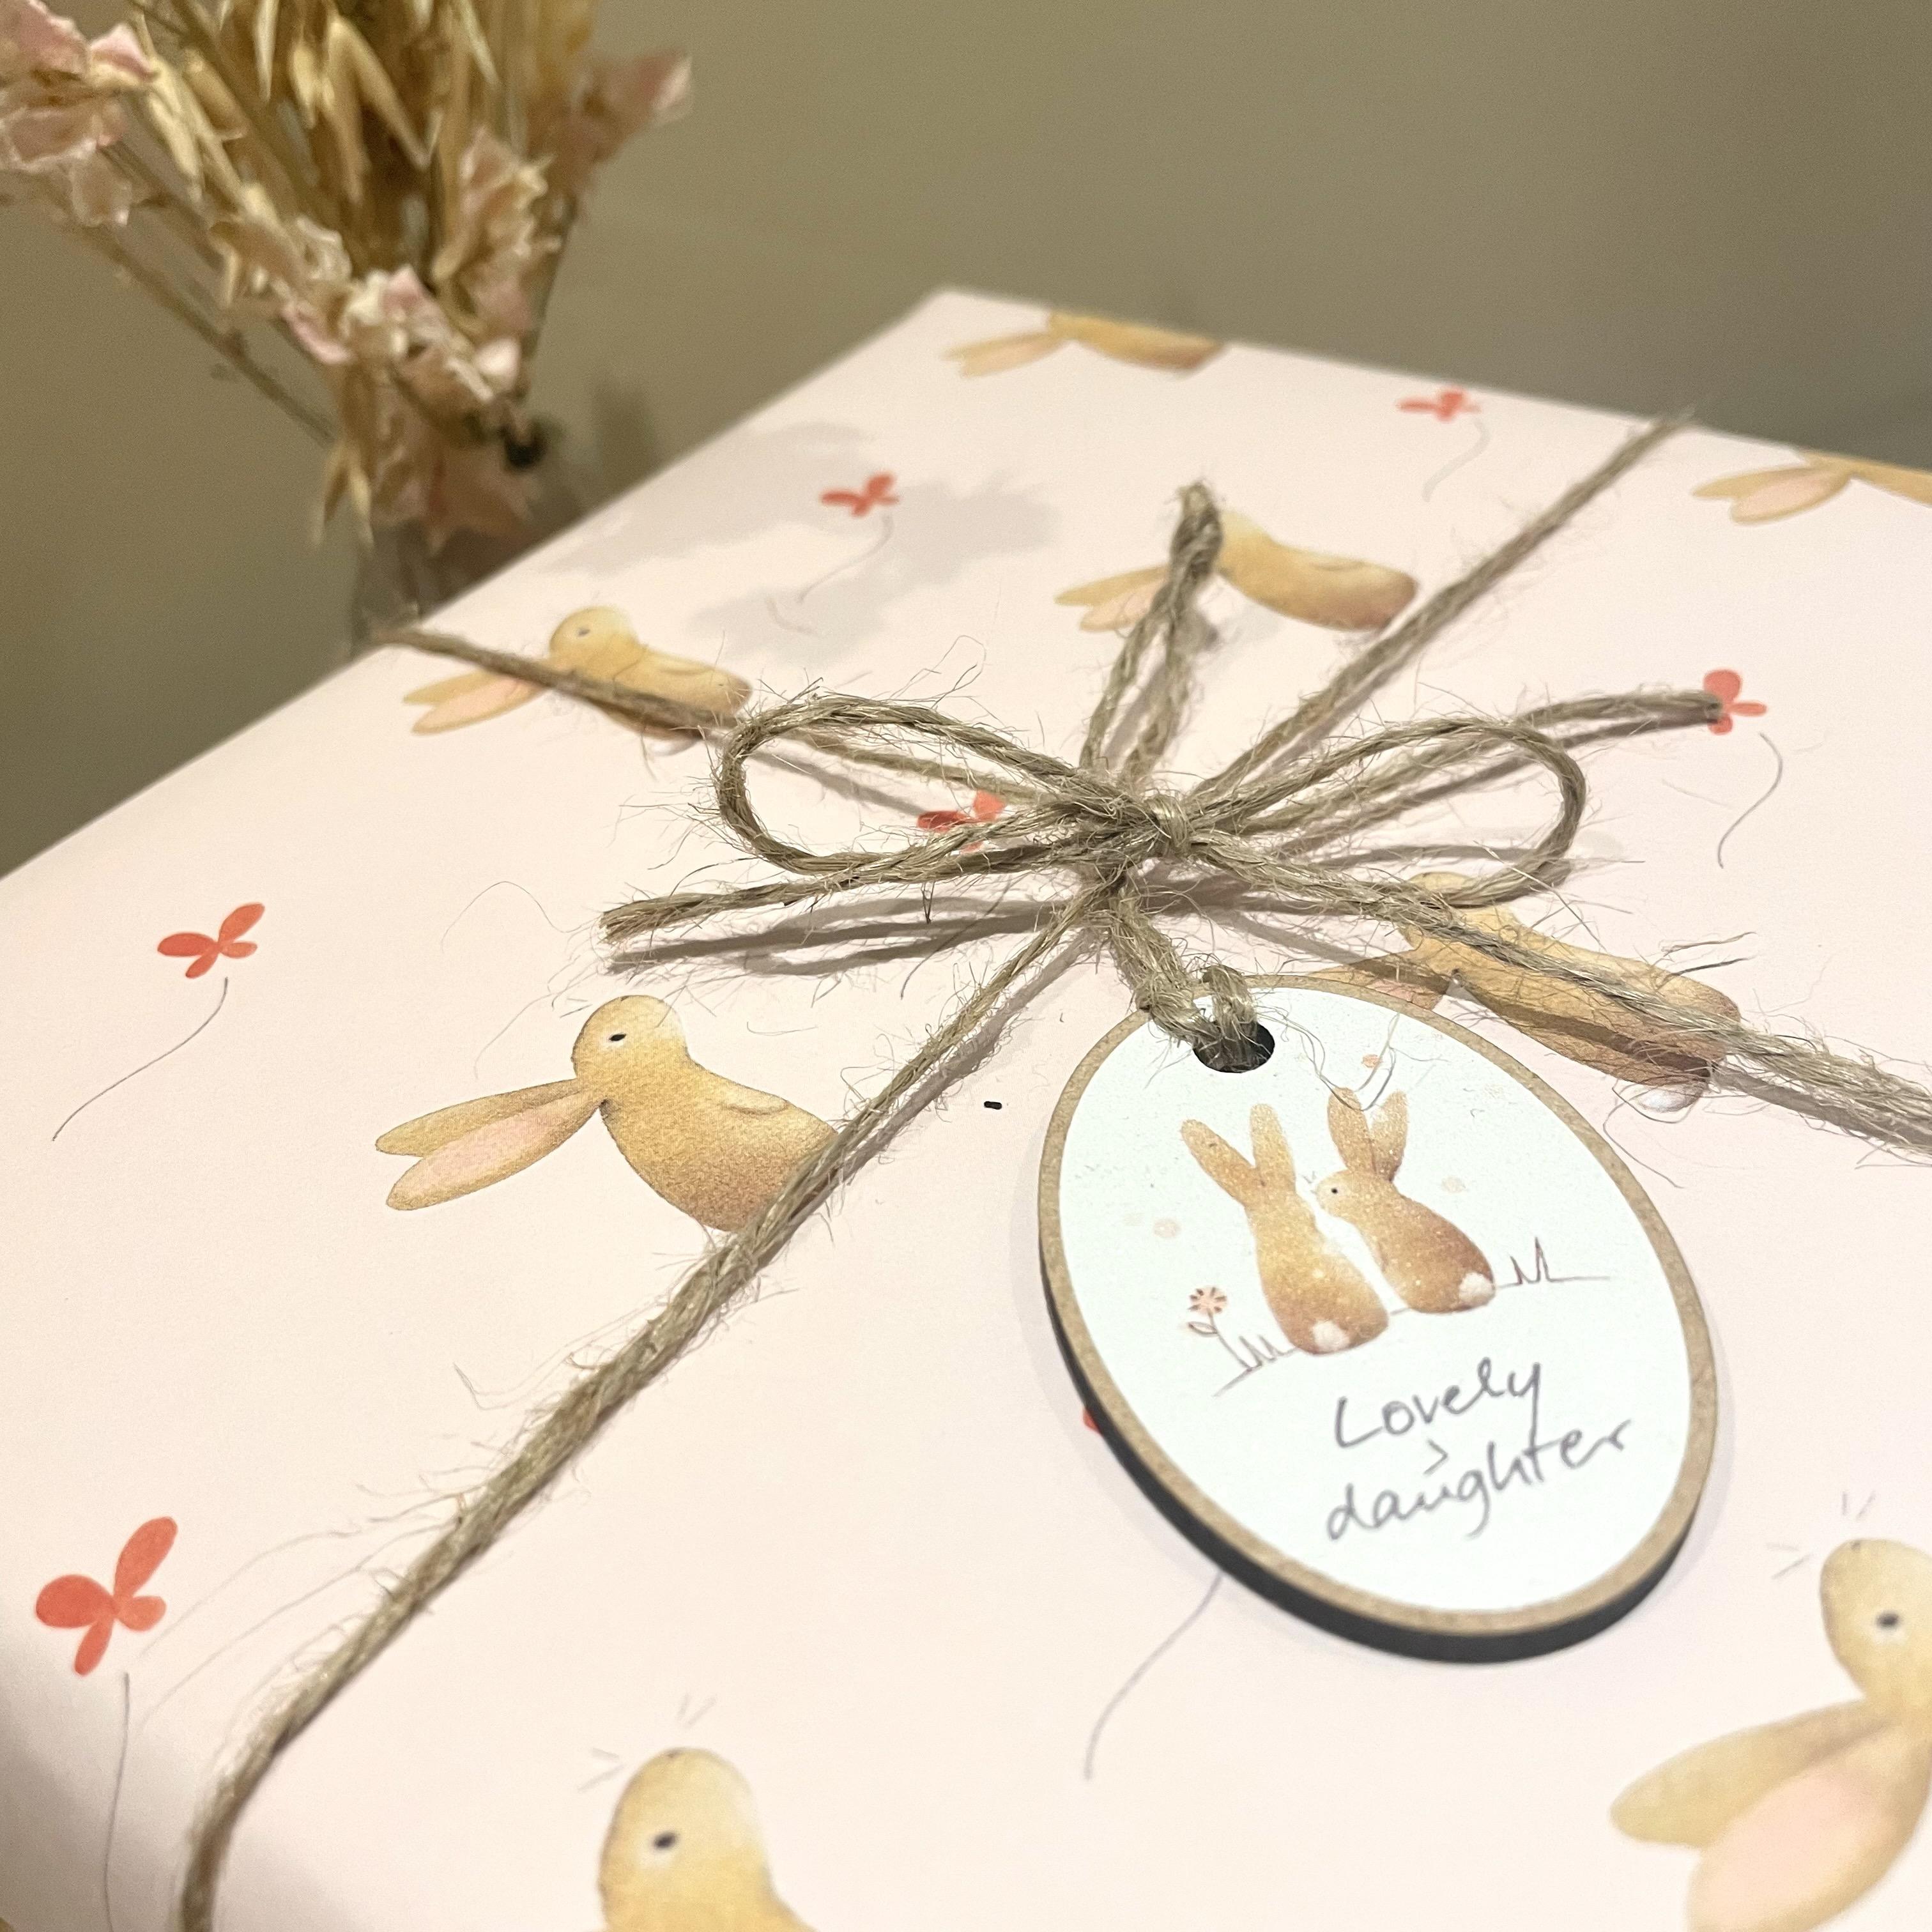 Image of little wooden tag on wrapped present